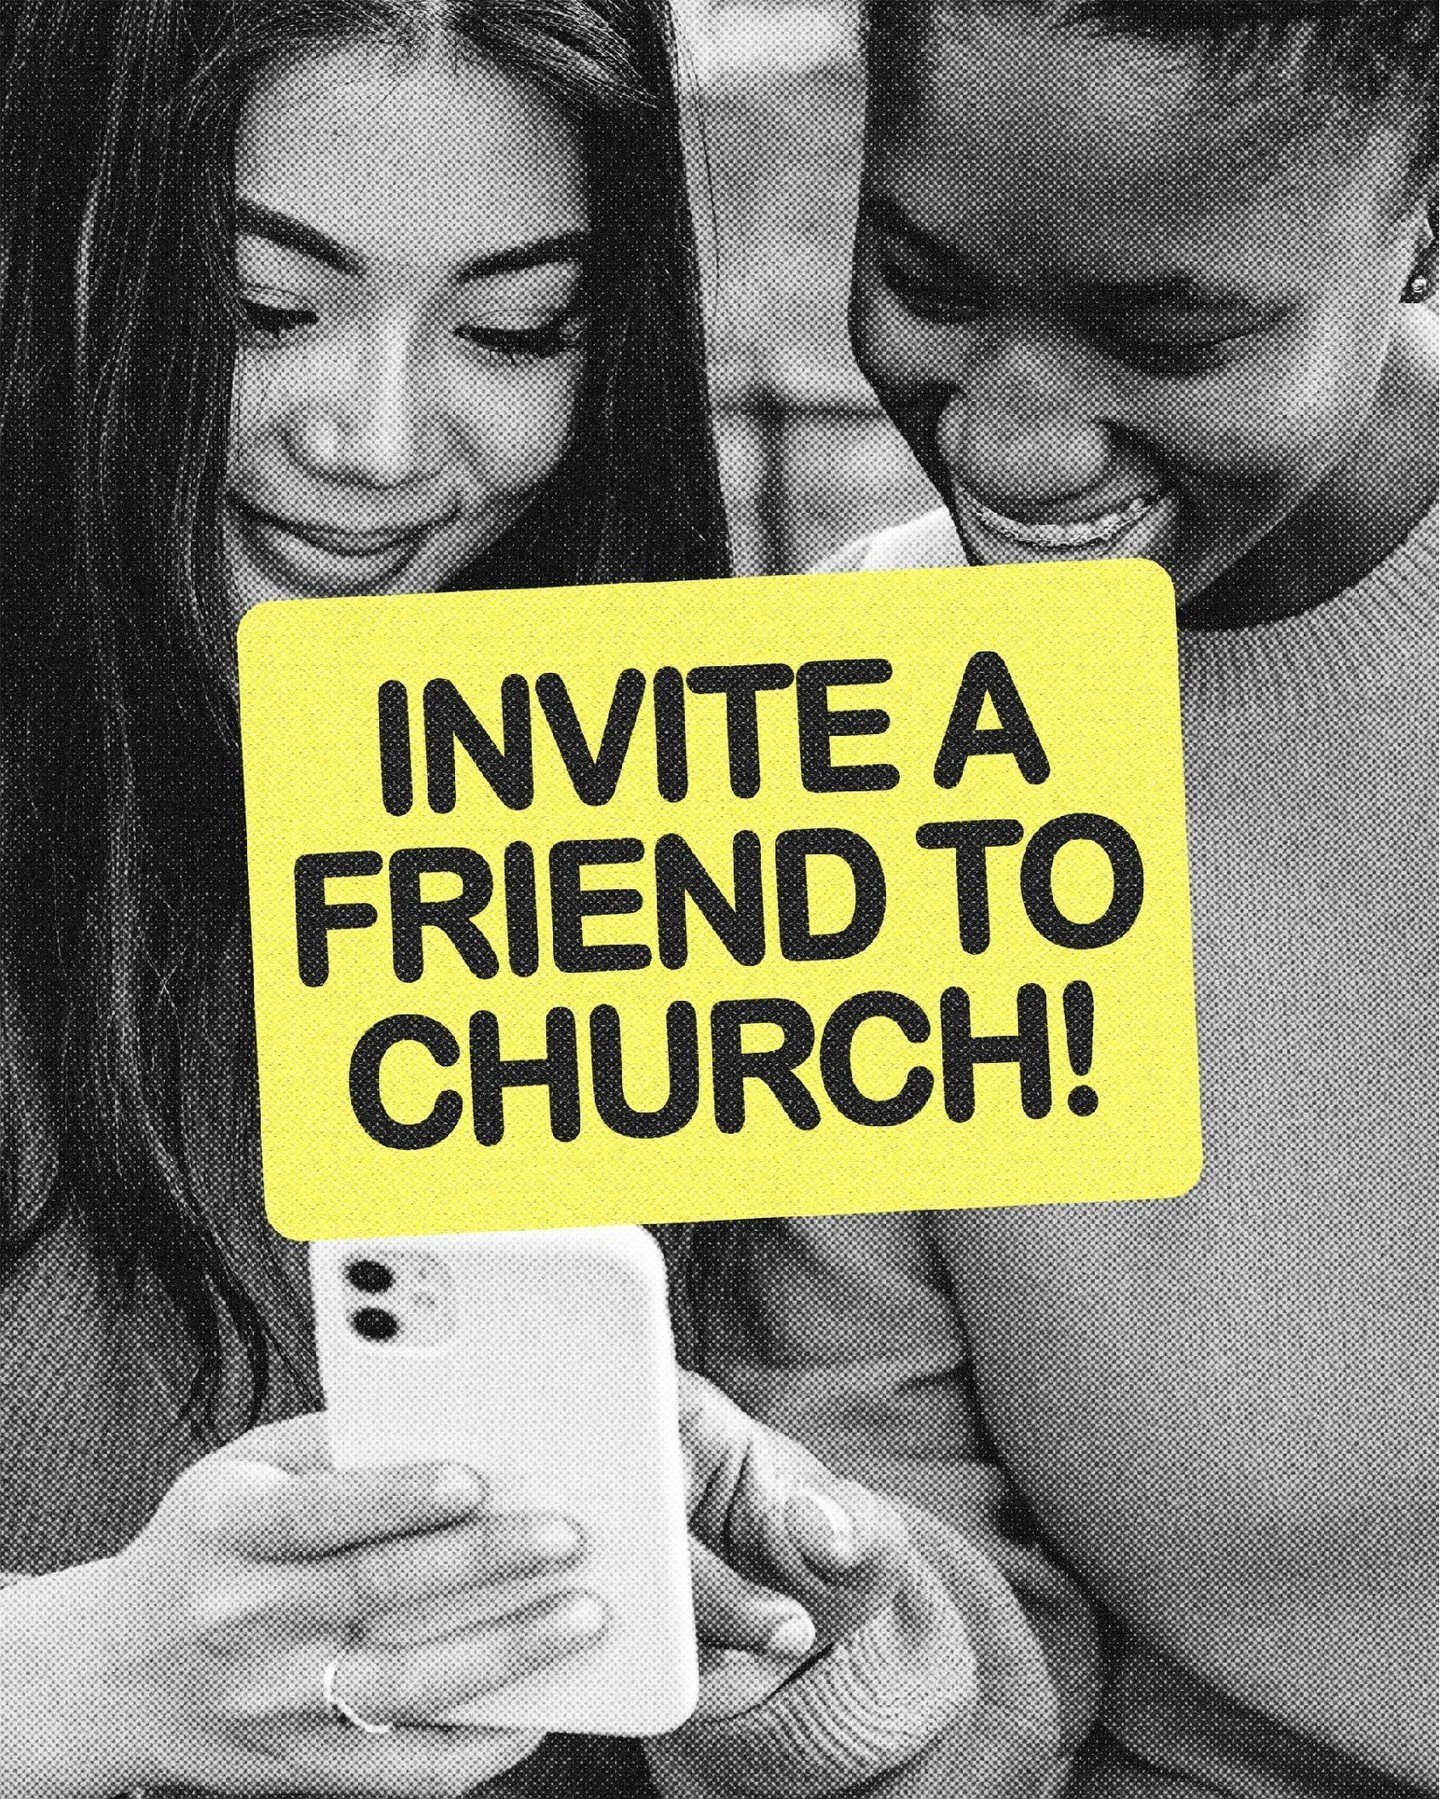 Invite a friend to church this Sunday!
.
.
.
#church #god #morning #jesus #christ #love #christian #saturday #service #worship #christianlife